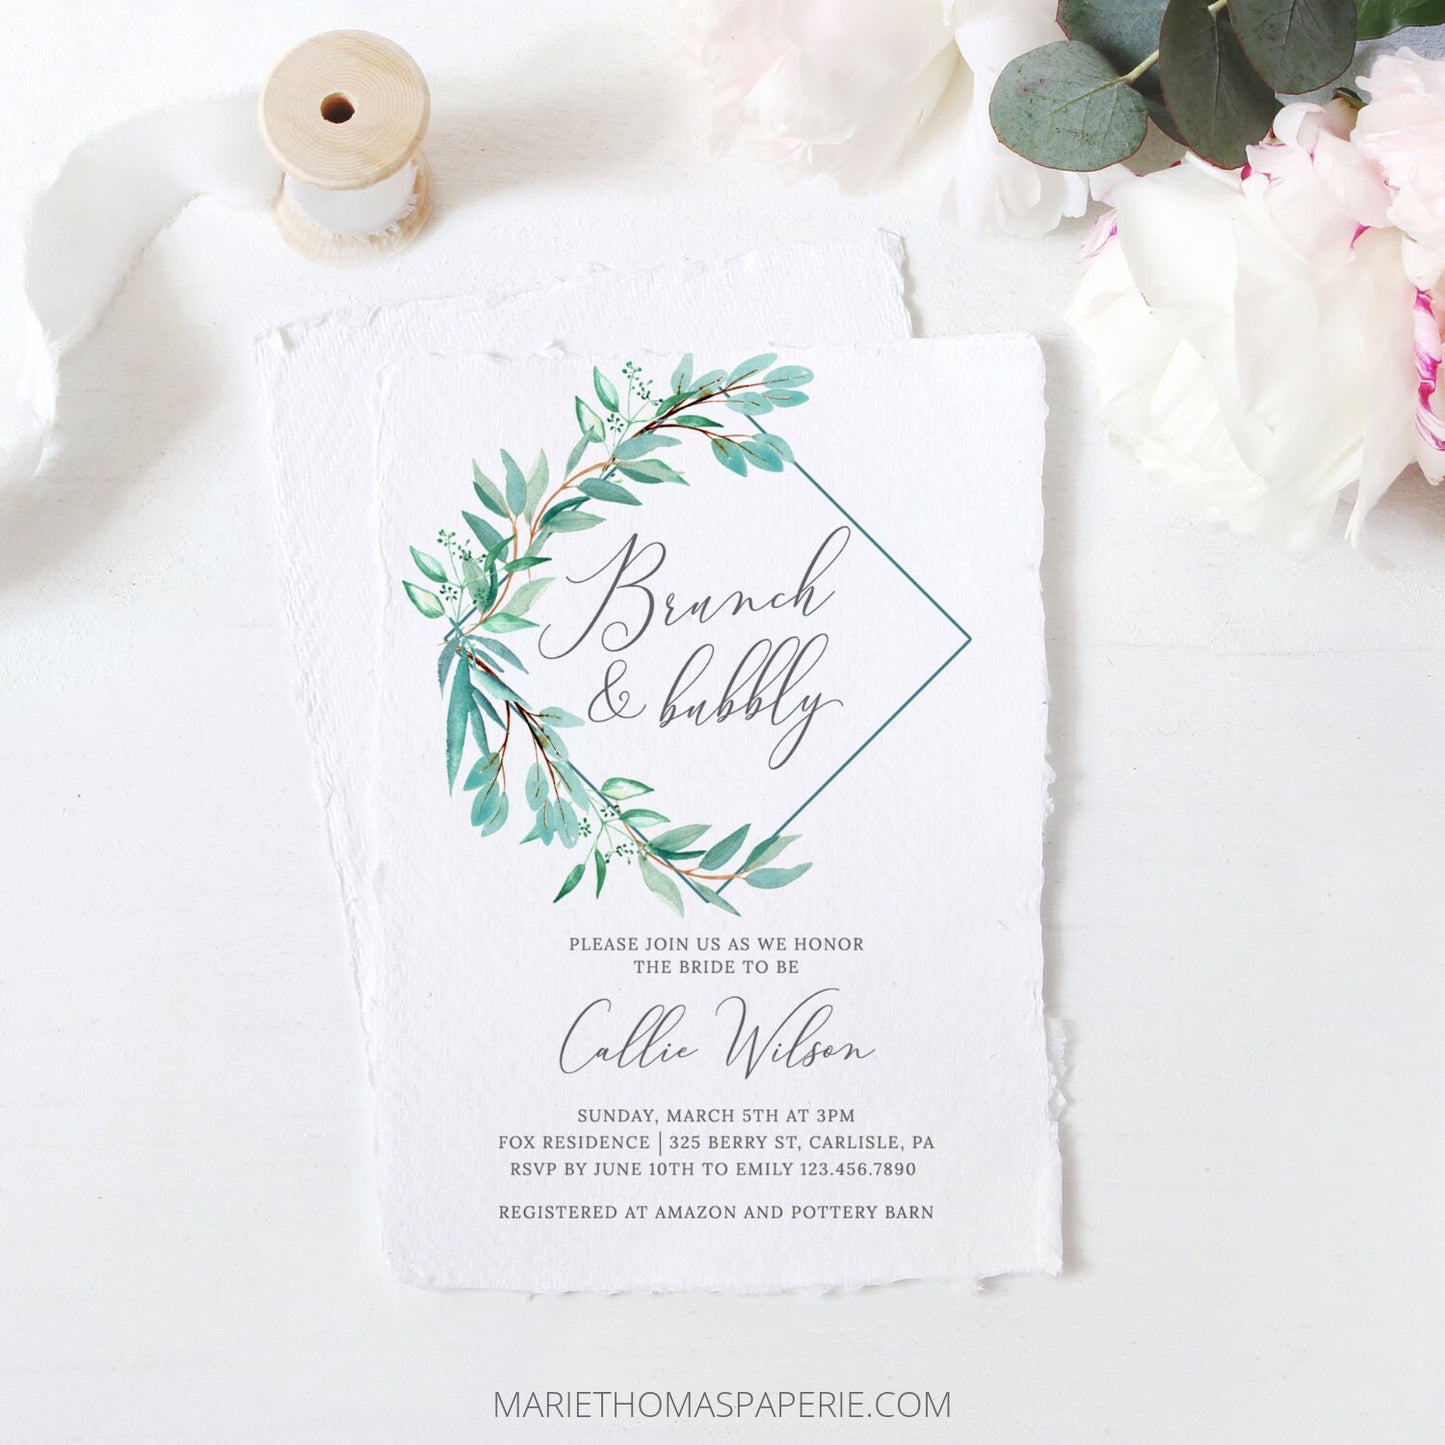 Editable Brunch and Bubbly Bridal Shower Invitation Eucalyptus Greenery Wreath Bridal Shower Invite Template